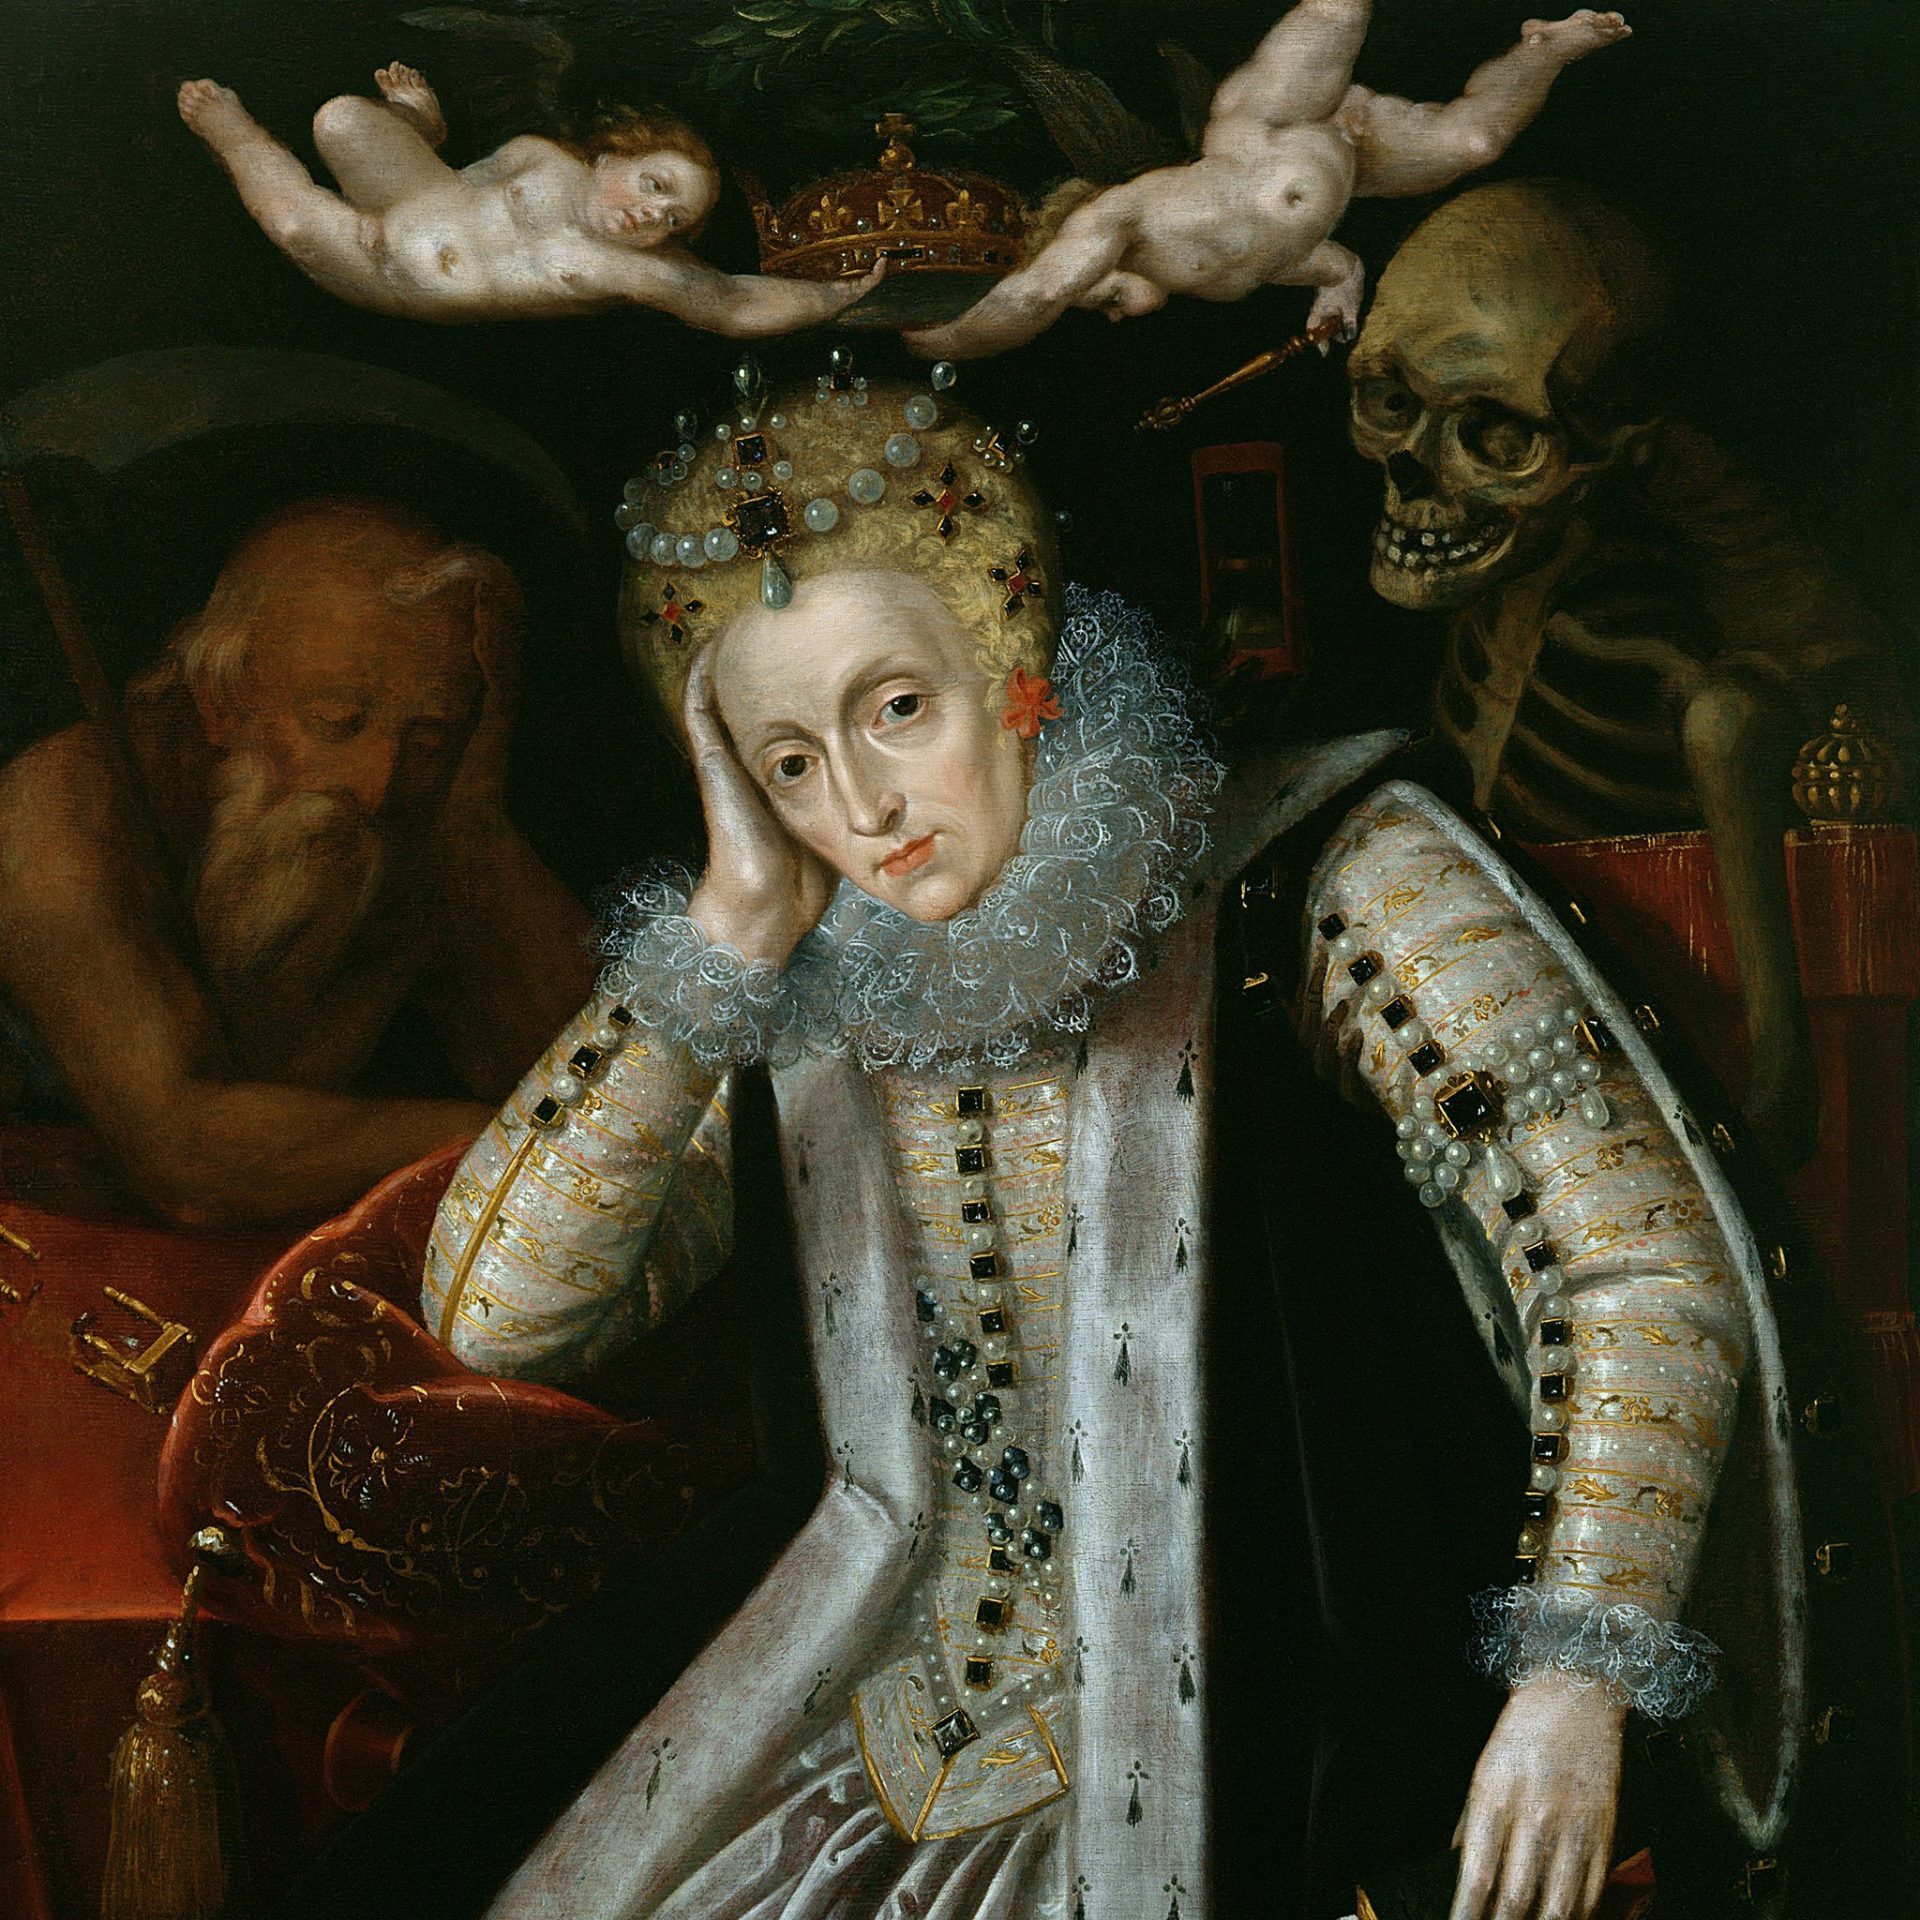 A portrait painting of Elizabeth I depicting the queen in her signature white makeup, surrounded by figures of a an elderly man, a skeleton, and two angels.